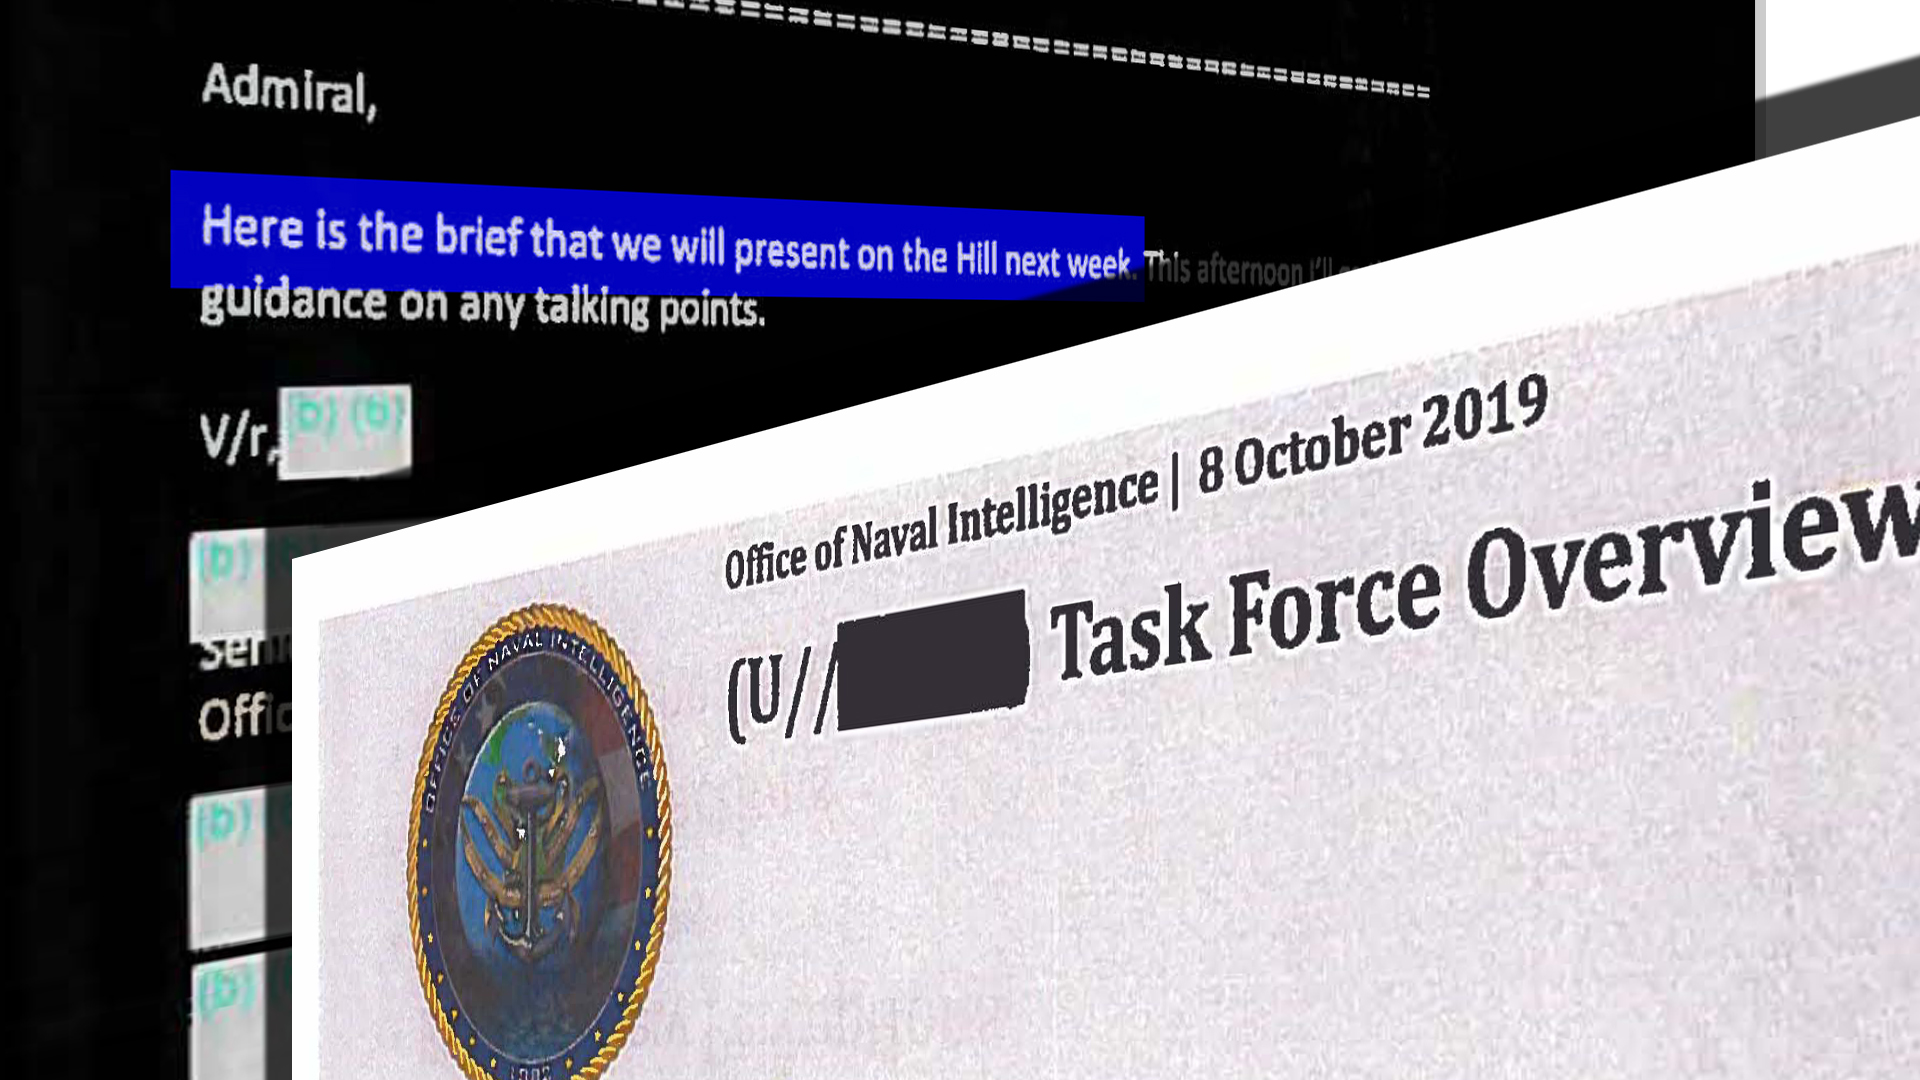 U.S. Navy Releases Heavily Redacted UAP/UFO Briefing Given To Congress in October 2019